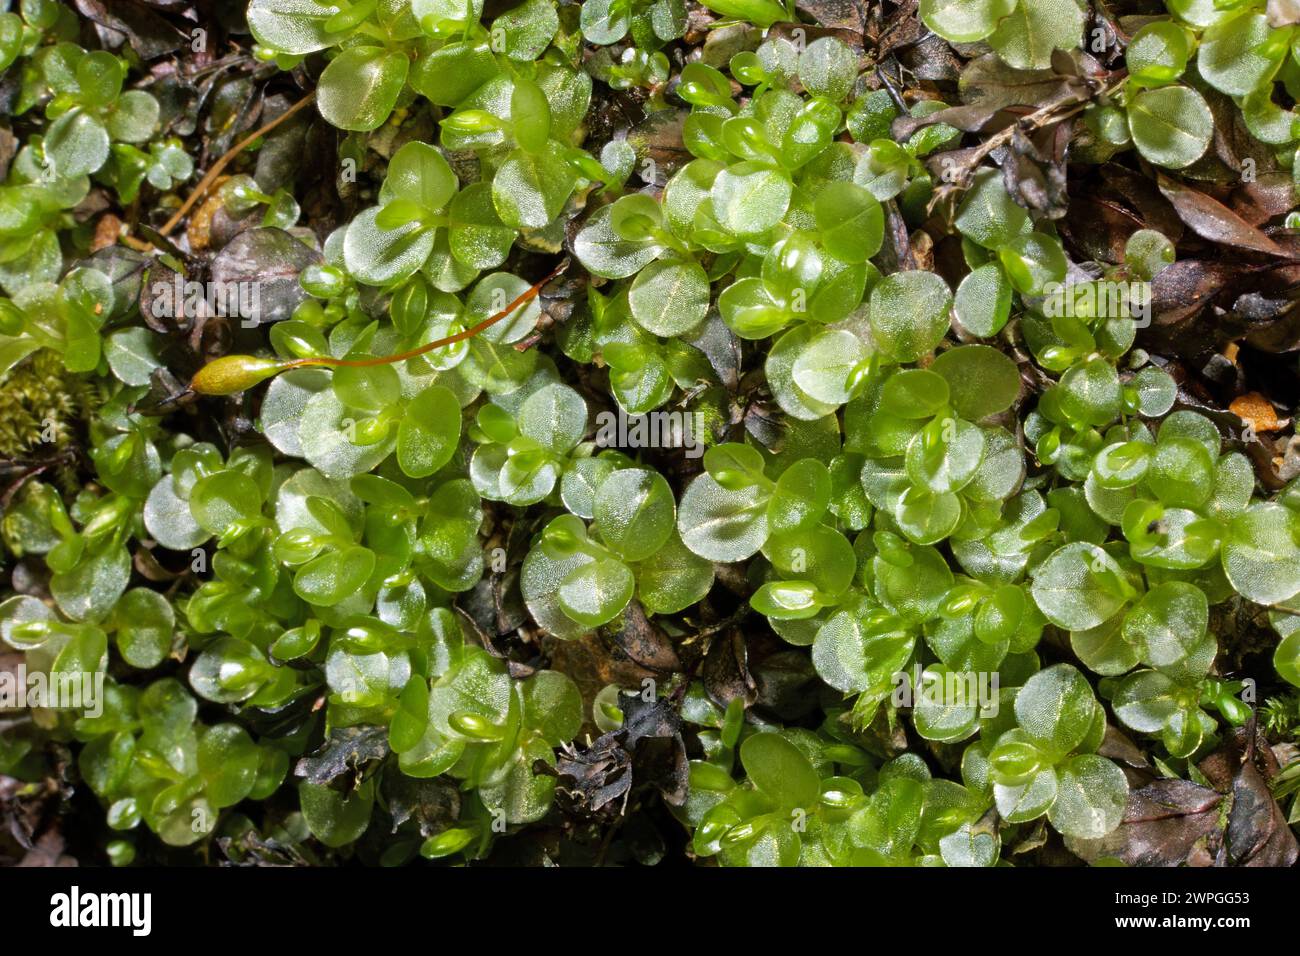 Rhizomnium punctatum (Dotted Thyme-moss) occurs on damp soil, rock, and rotting wood. It is native to Asia, Europe, North America and North Africa. Stock Photo